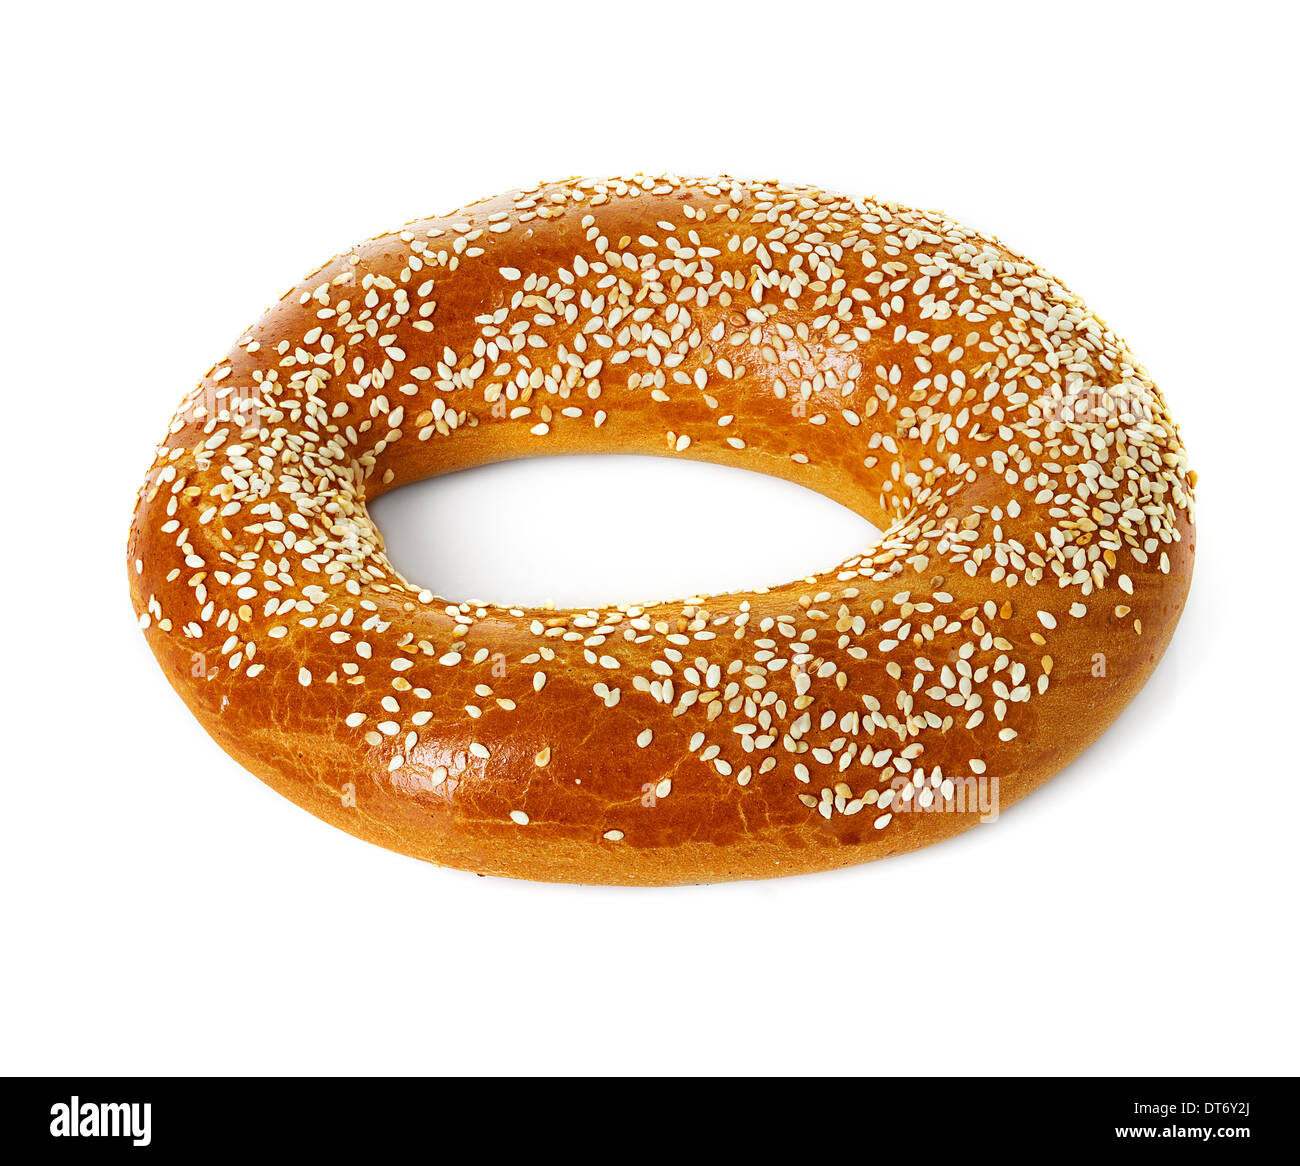 bagel with sesame seeds Stock Photo